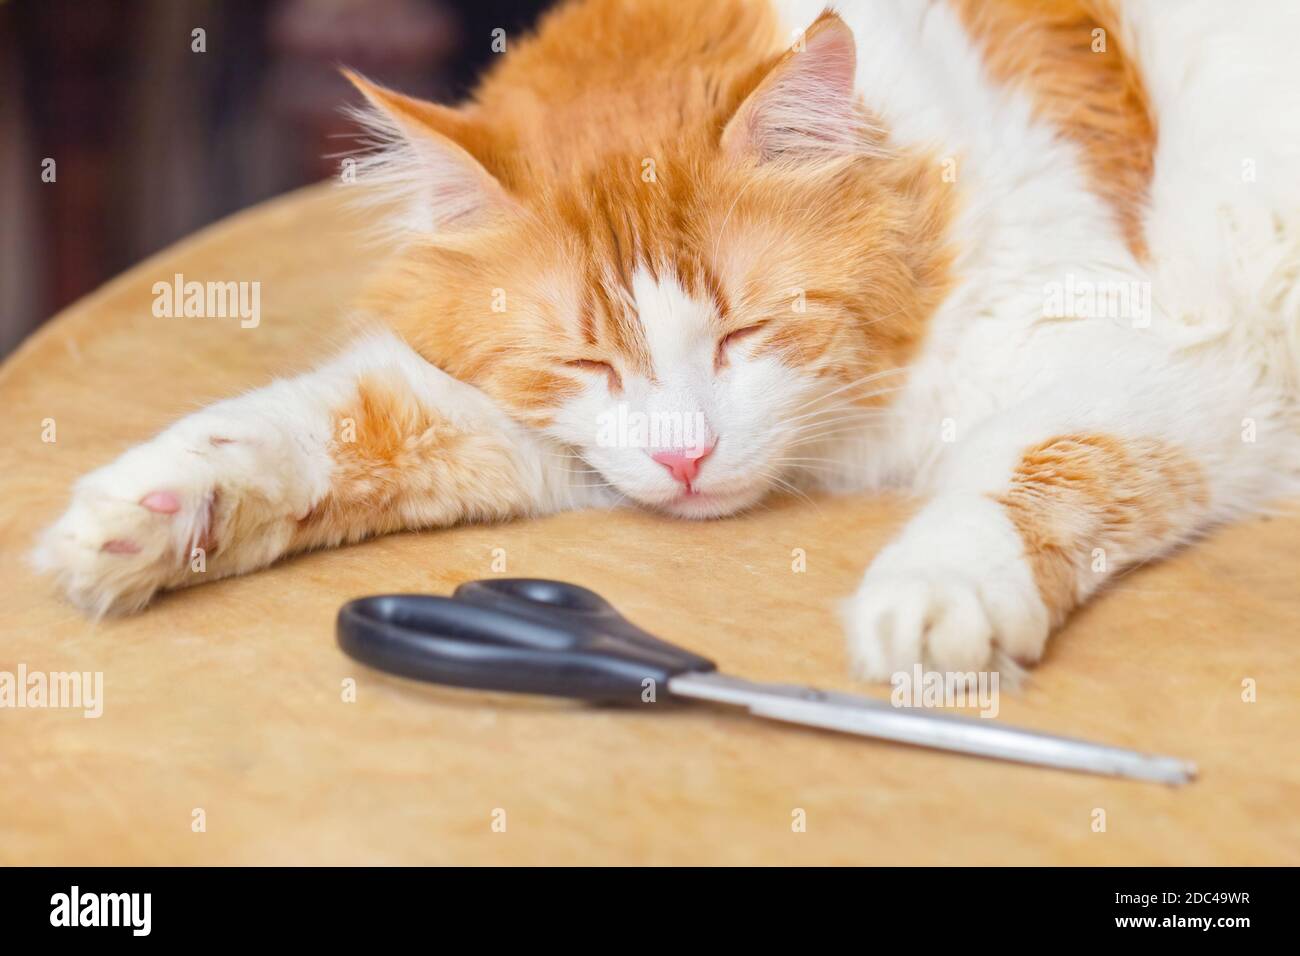 Black scissors and adult pretty red sleeping cat on table Stock Photo